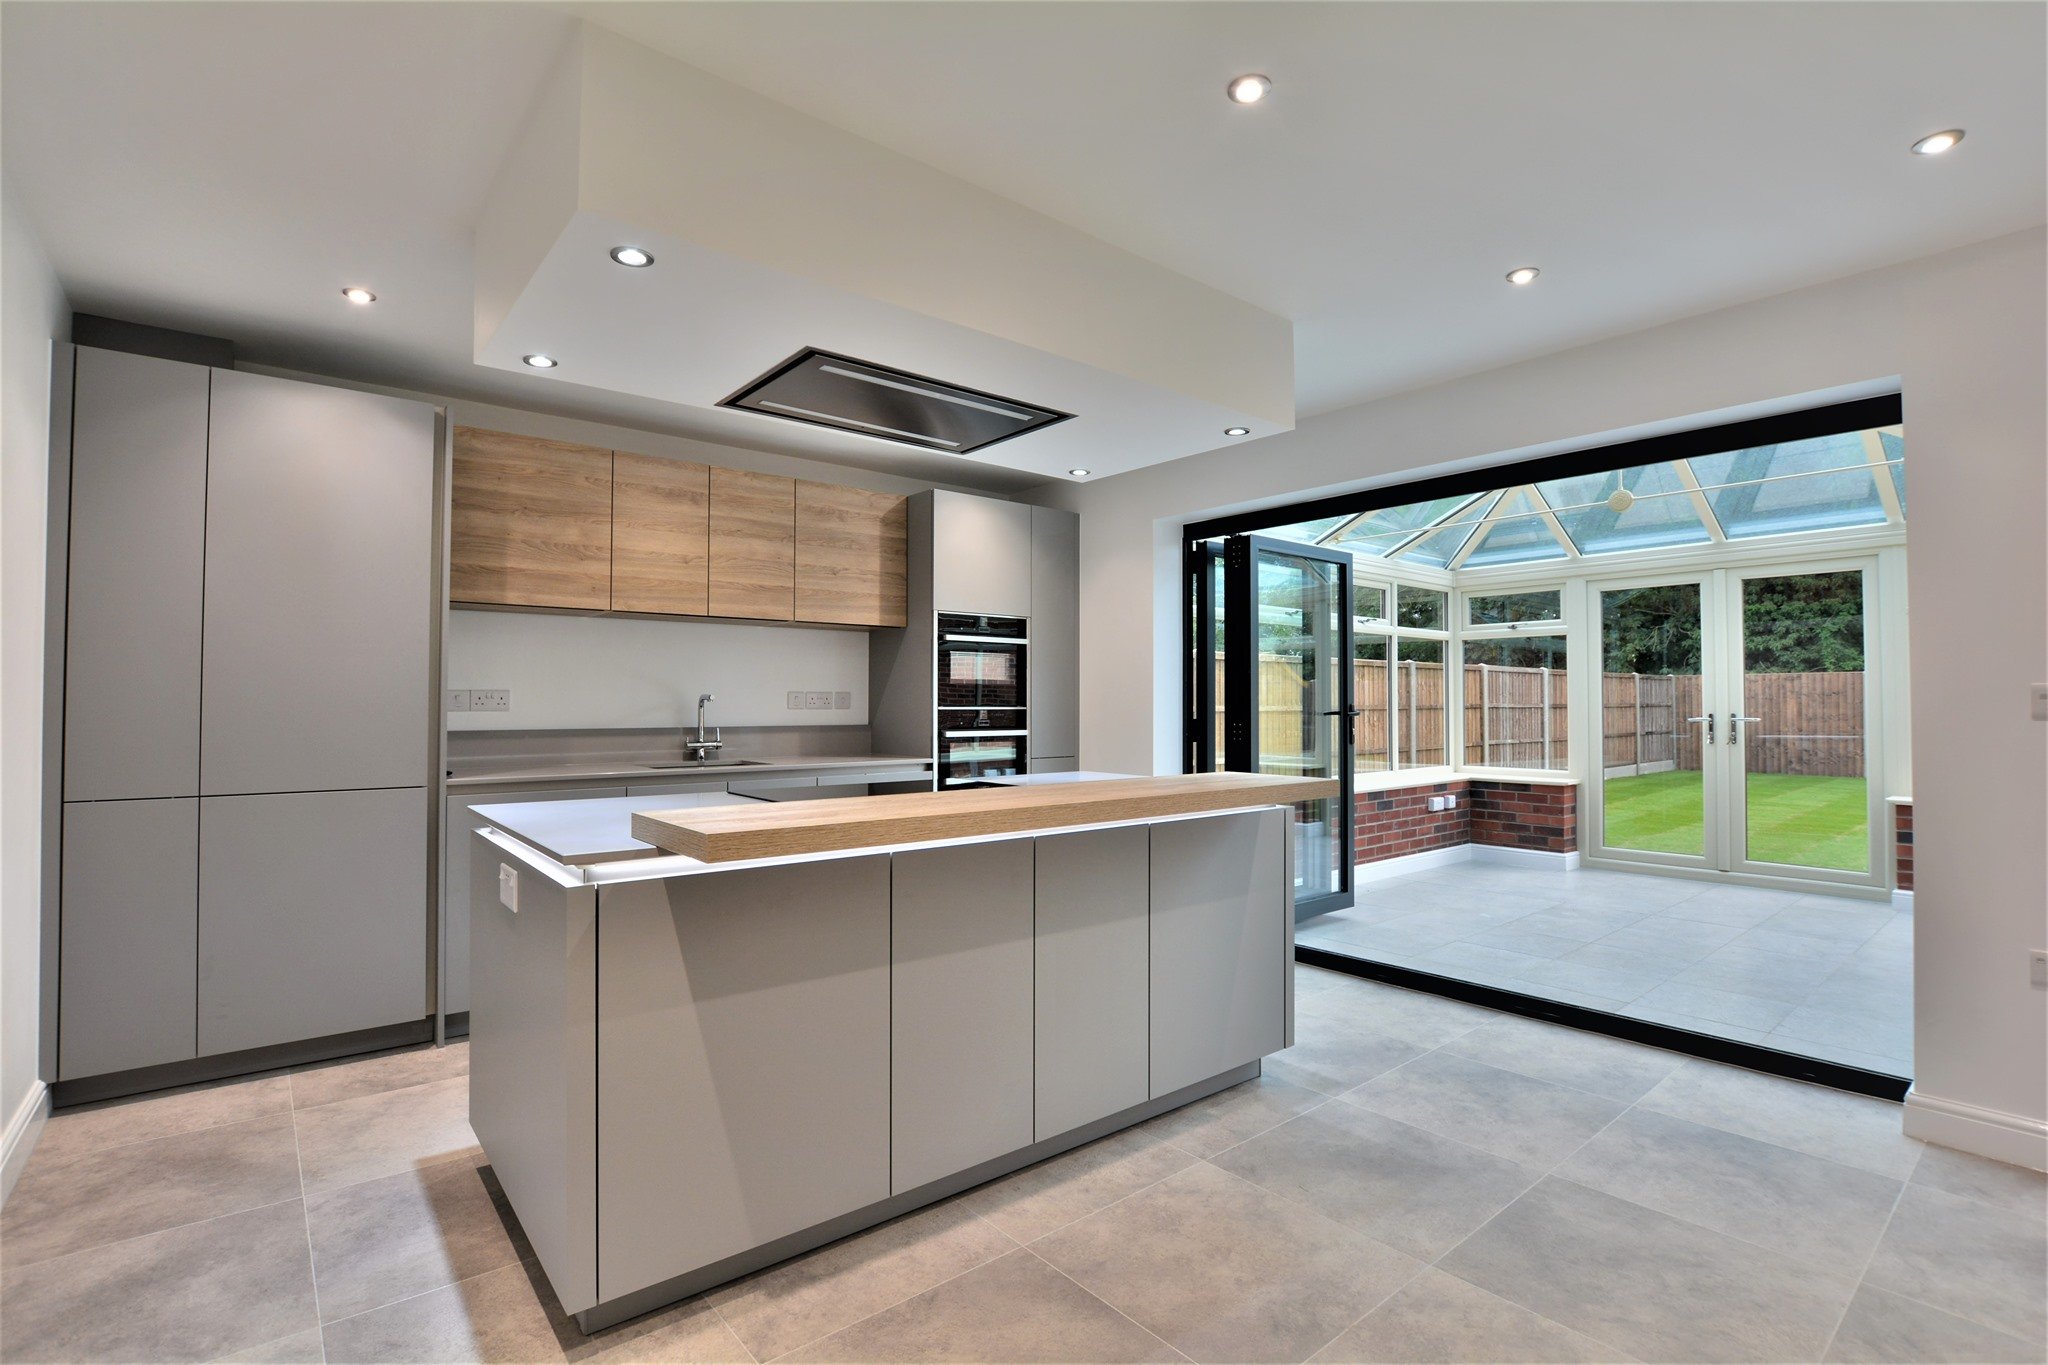 Clean lines and simple colours make this Grey Kitchen a perfect blank slate for new homeowners to put their mark on